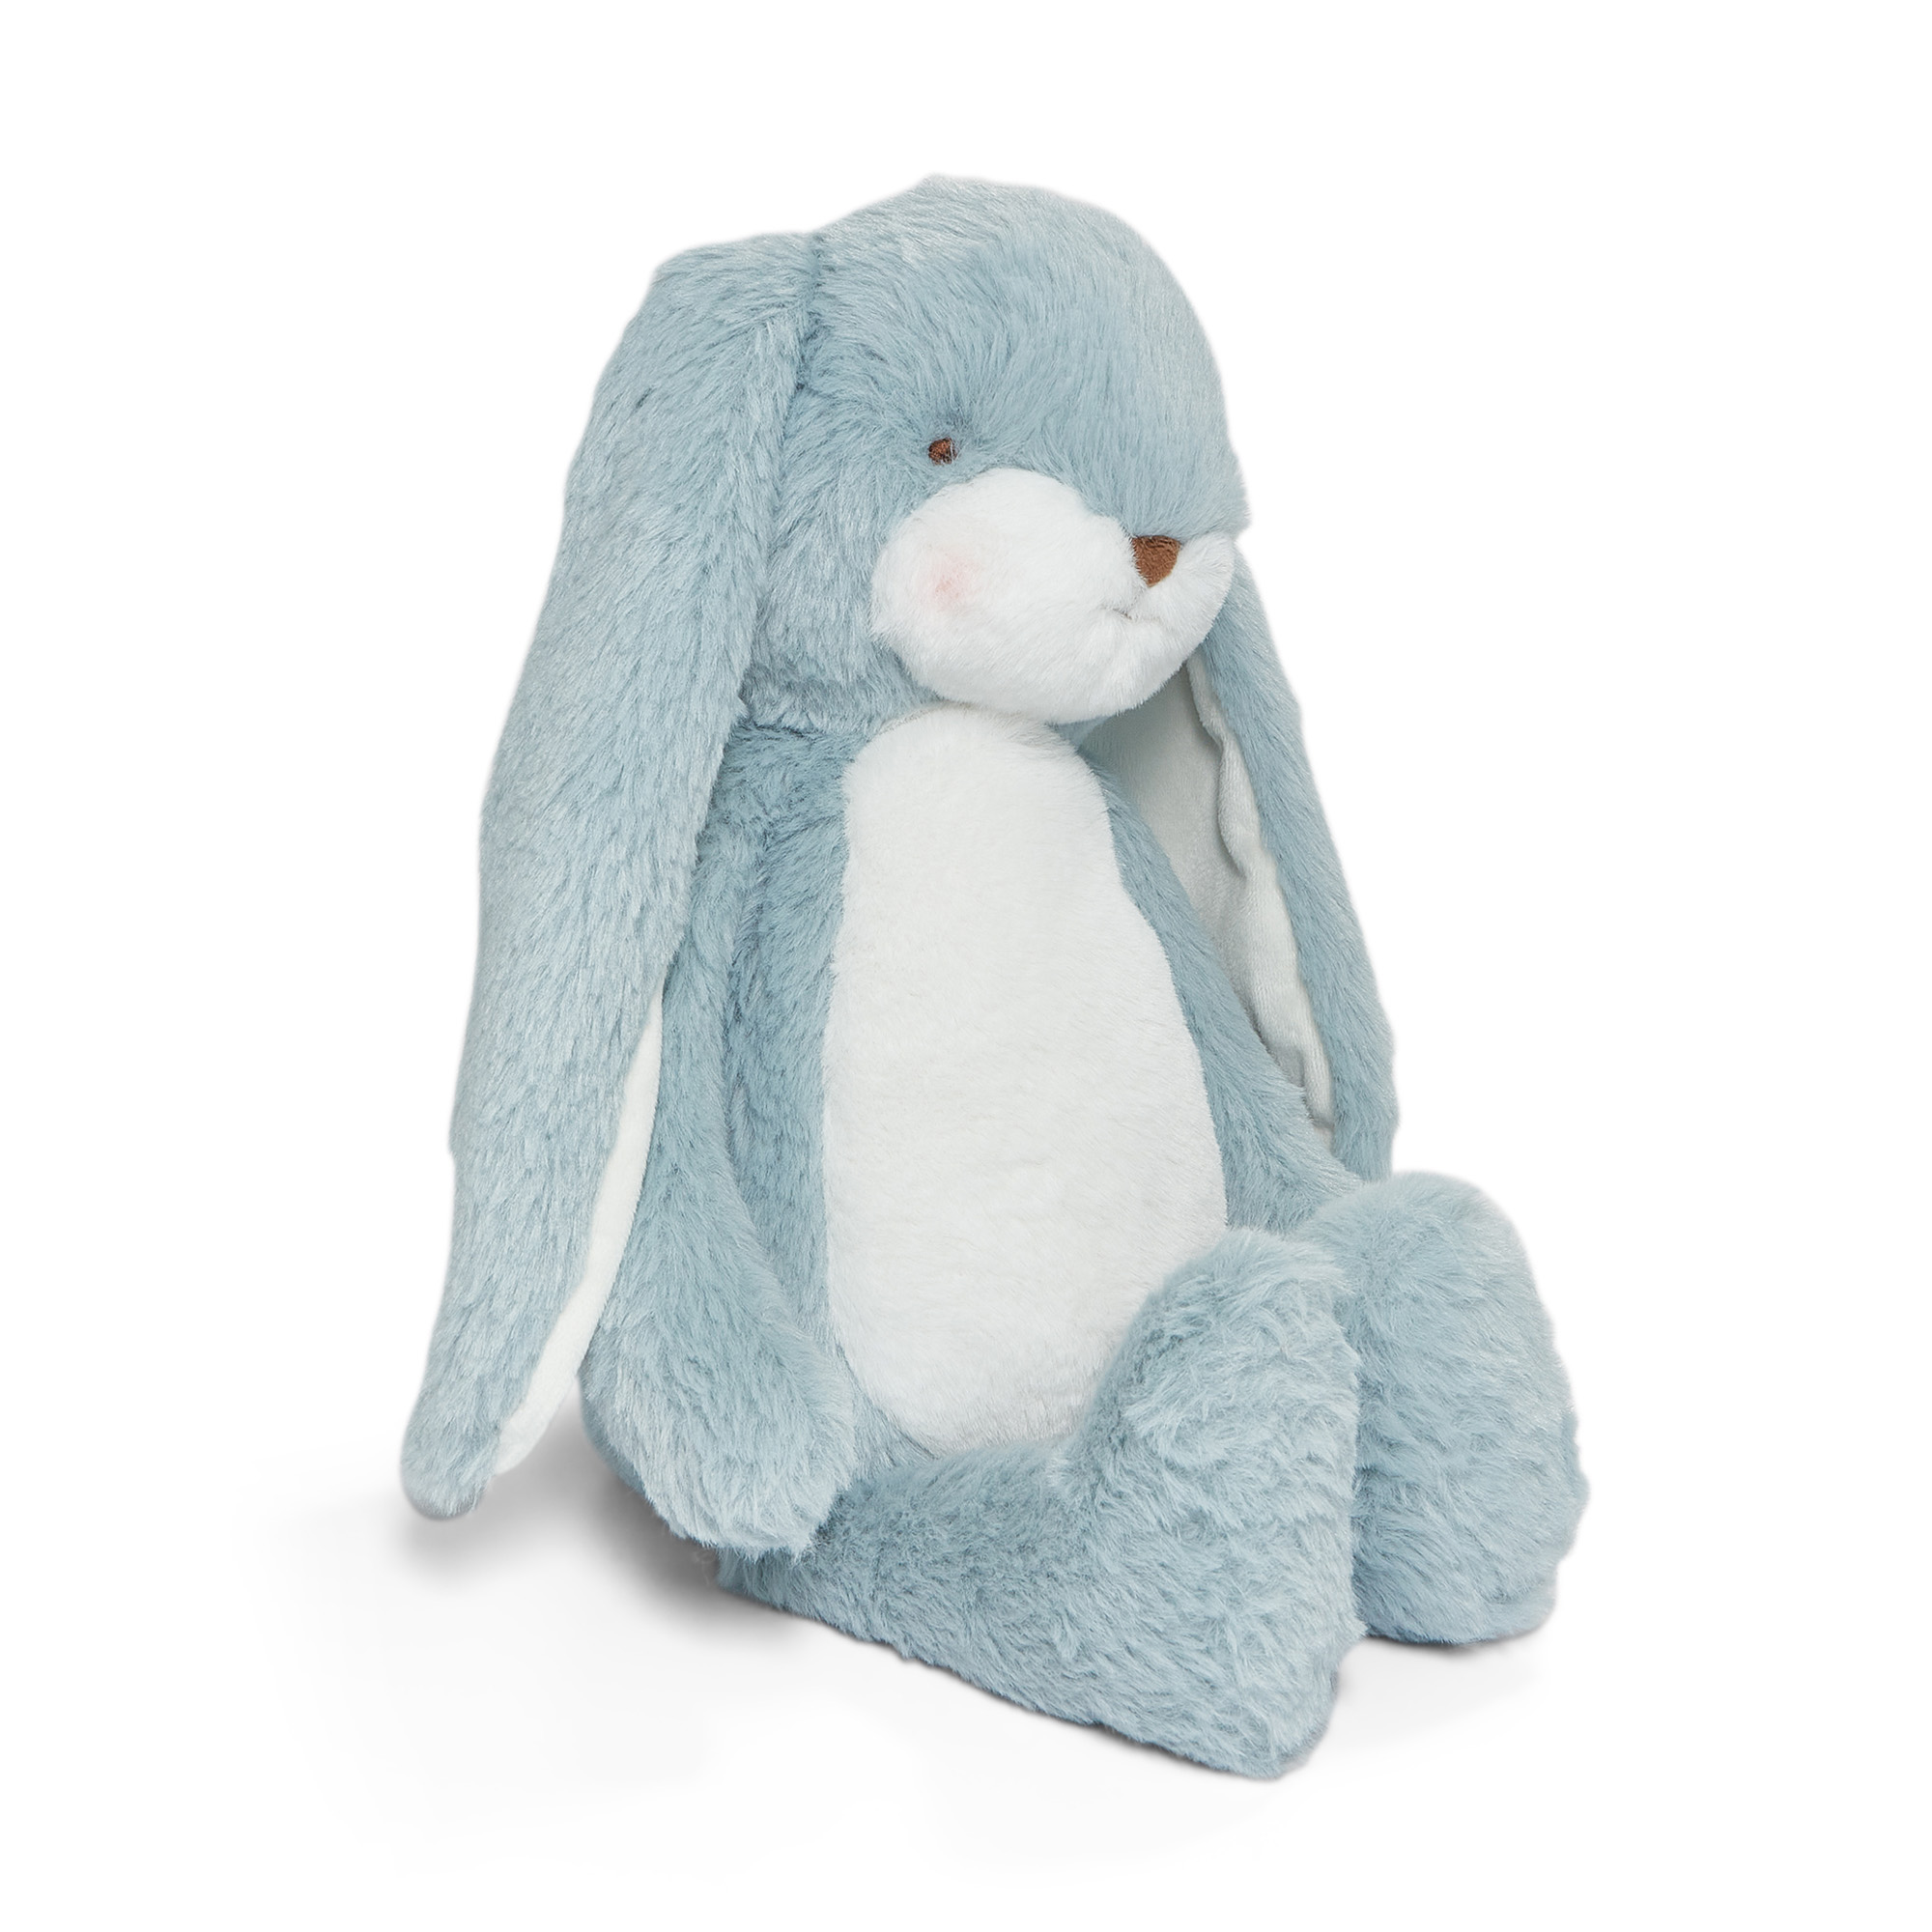 Peluche sweet nibble stormy blue 40cm - Bunnies By The Bay